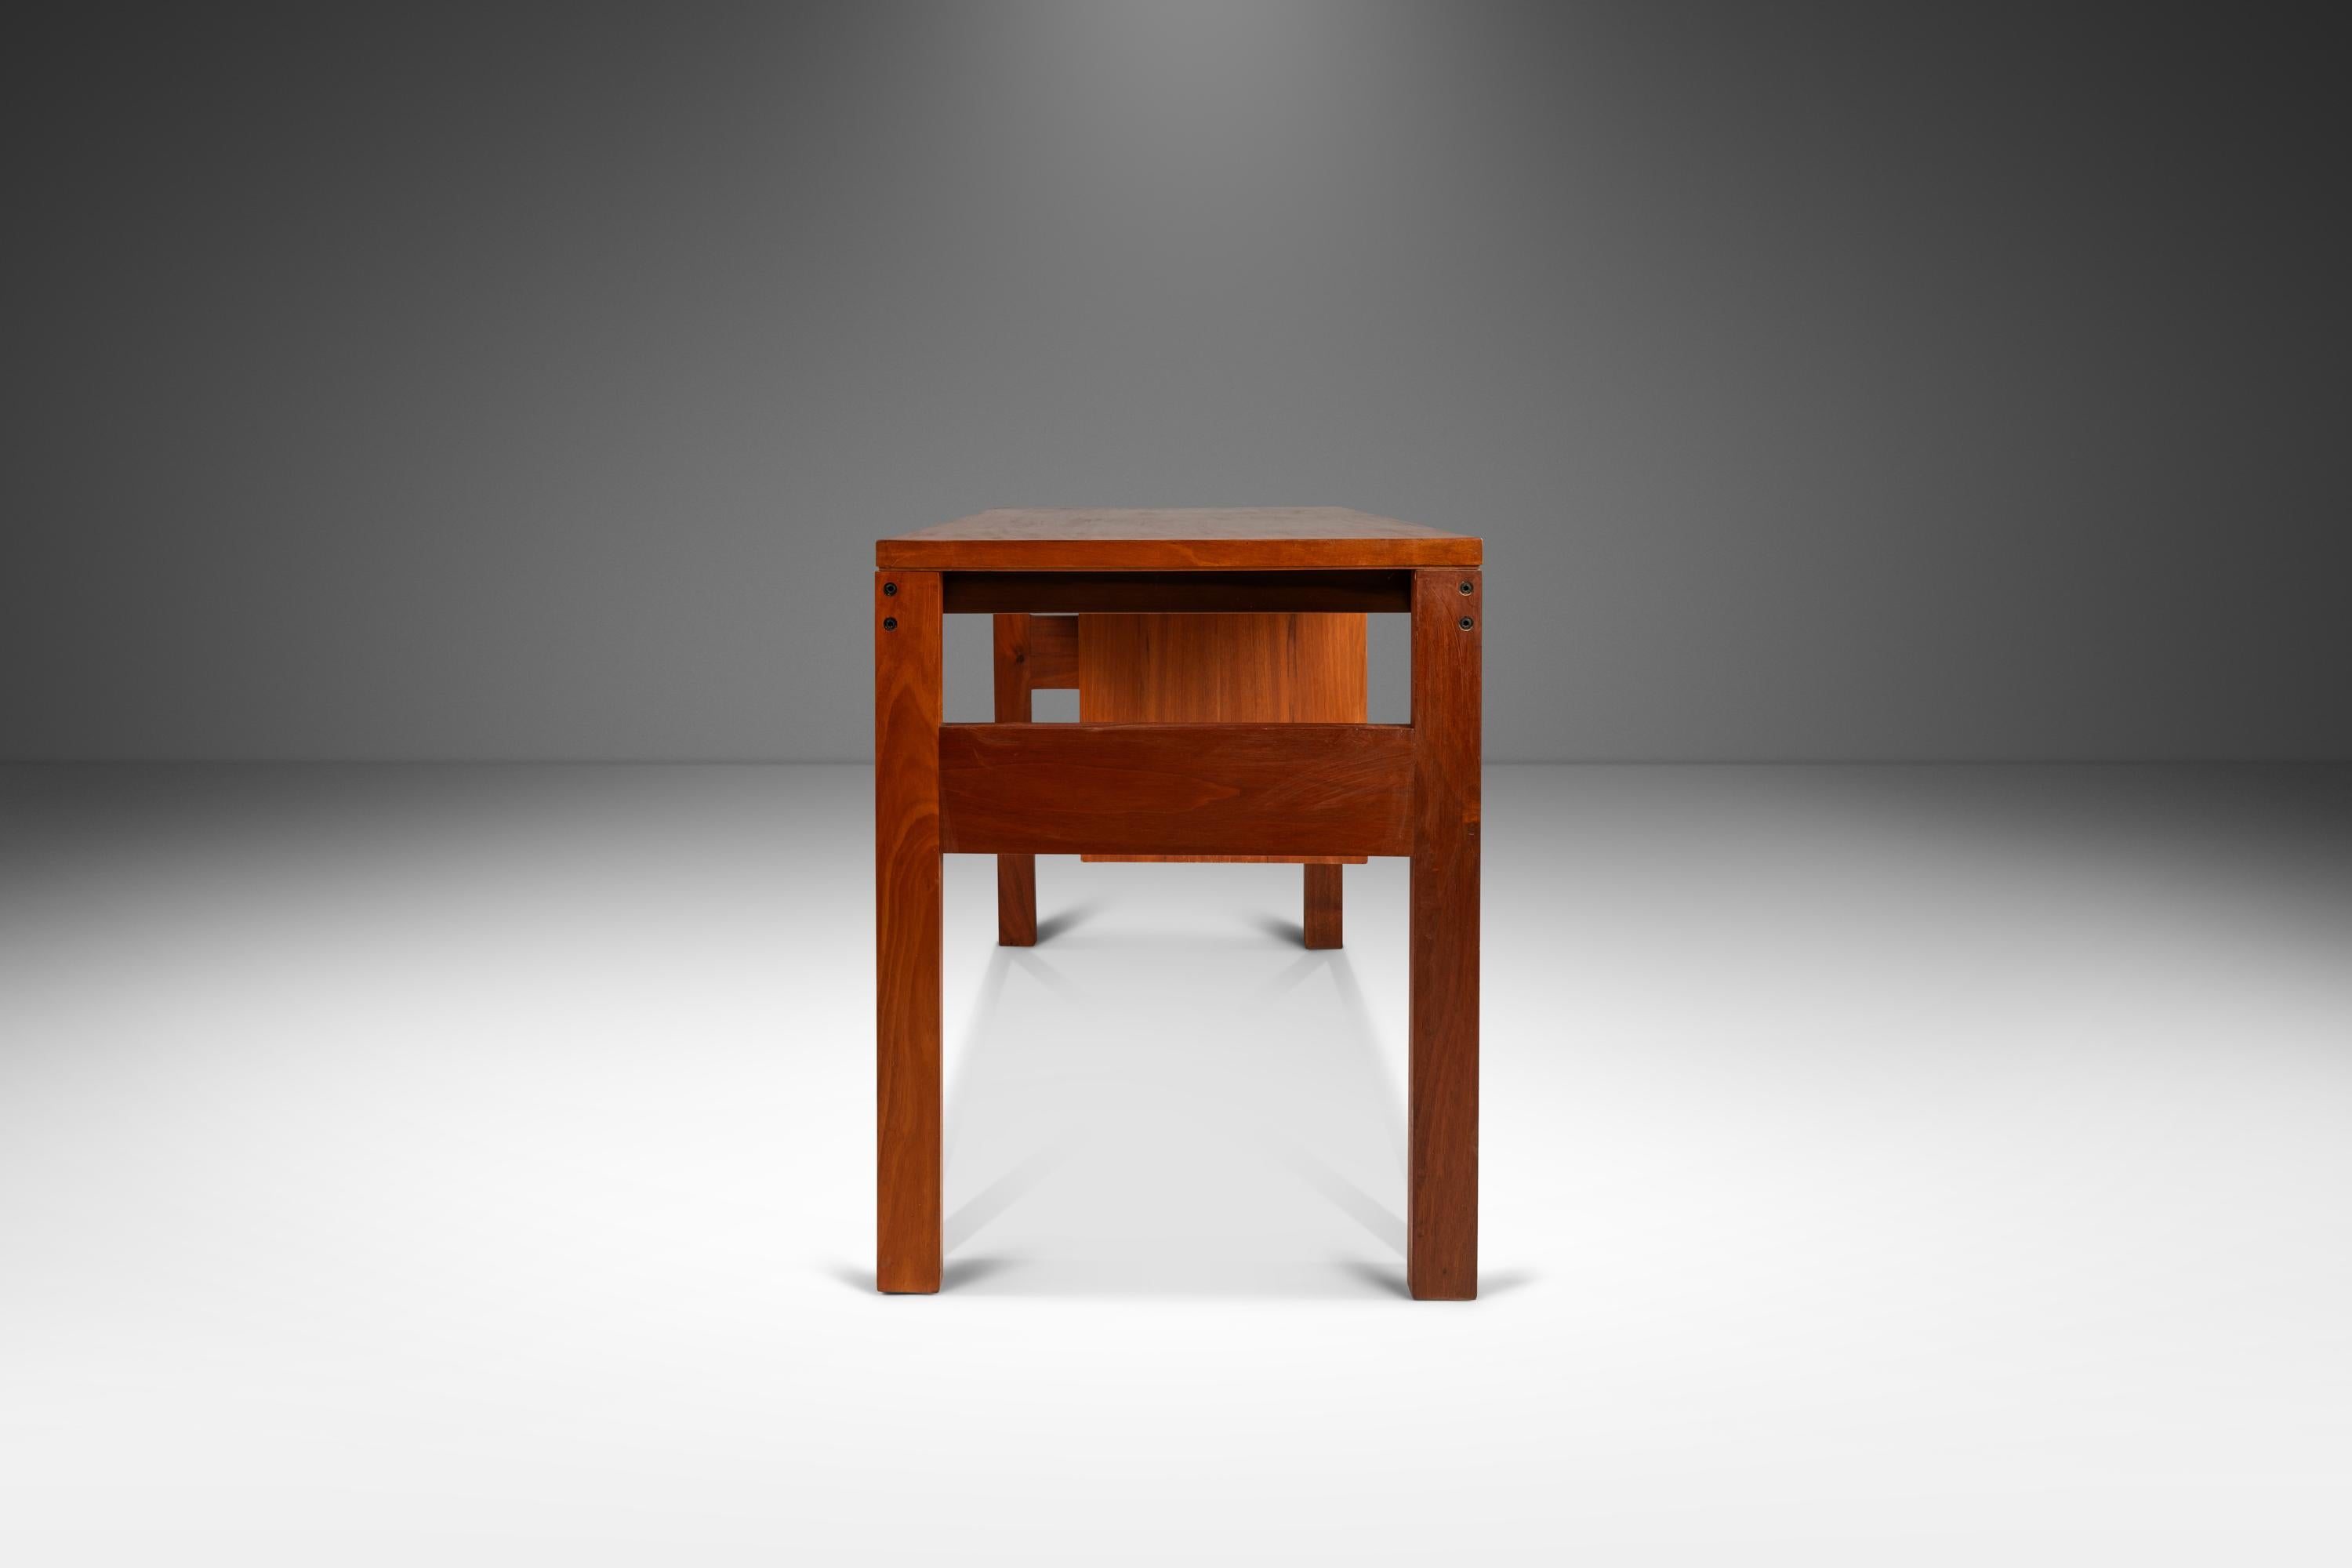 Introducing a splendid Danish Modern writers desk constructed from a mix of solid and veneered Burmese teak with exceptional woodgrains. Featuring three drawers with handles carved out of solid teak, even the drawer side walls and sliders are built